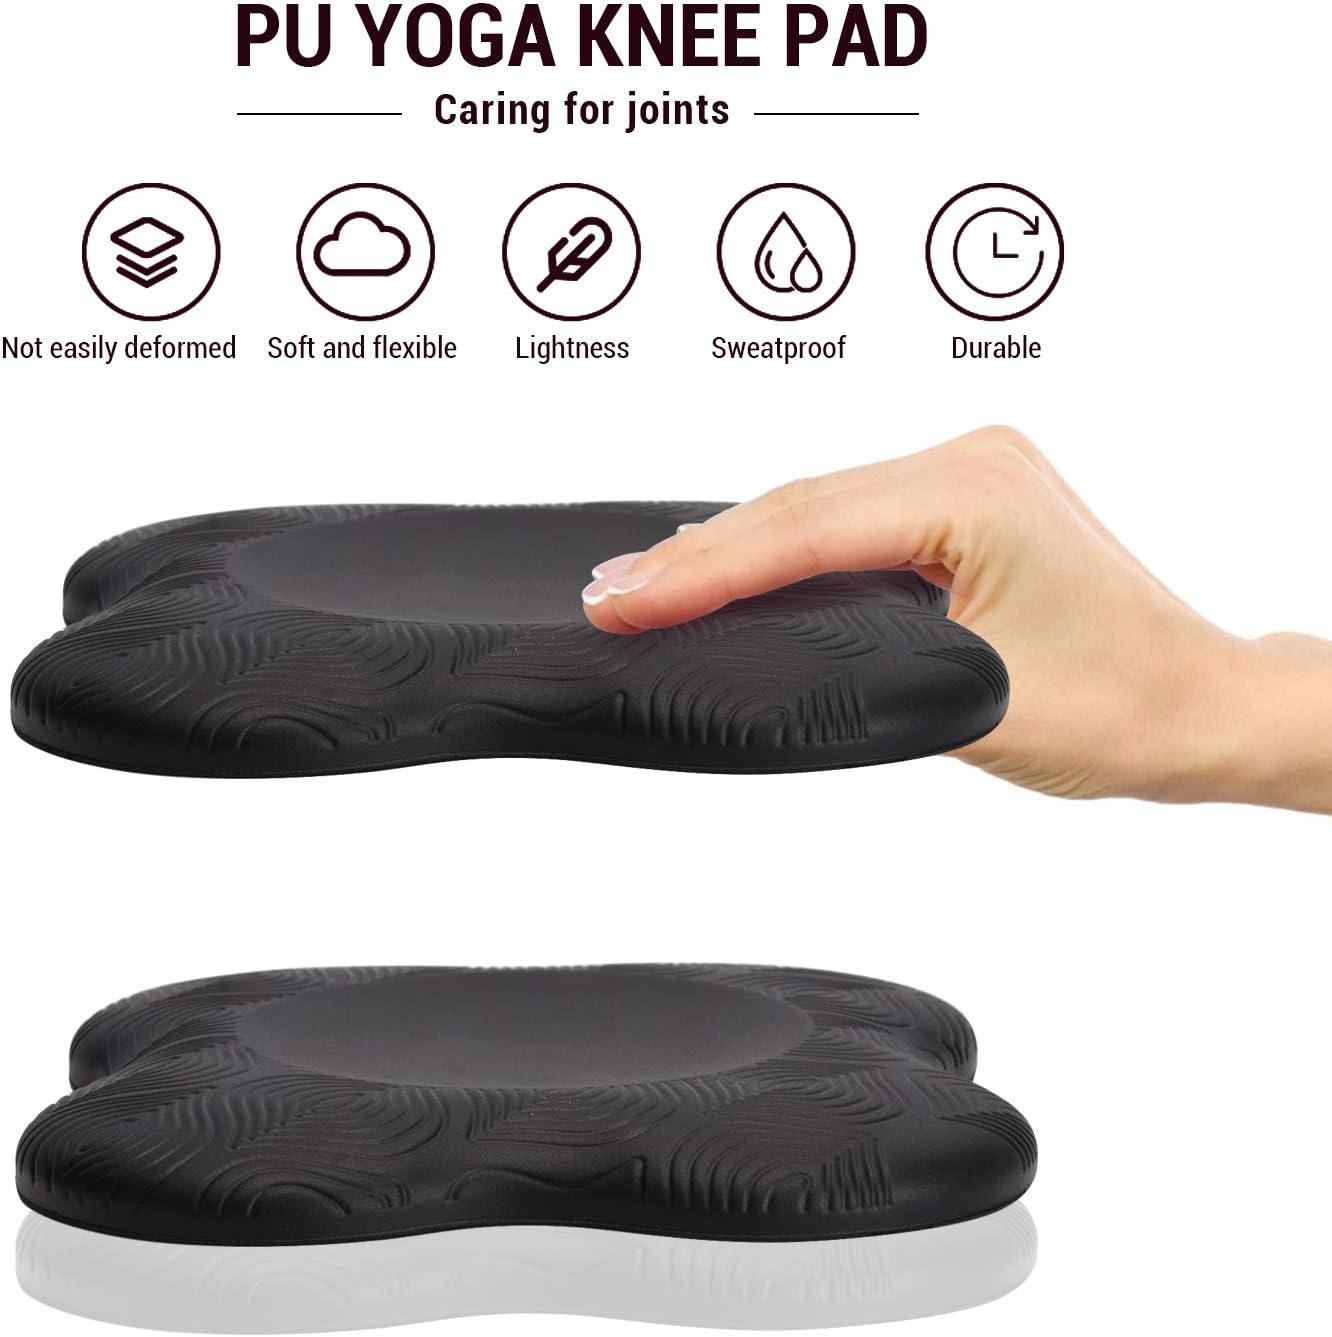 TOBWOLF 2PCS Yoga Knee Pad, Anti Slip Yoga Support Pad Pilates Kneeling Pad,  Extra Thick Exercise Workout Knee Pad Kneeling Support, Sports Balance  Cushion for Protecting Knee, Ankle, Elbow, Hand Foam 